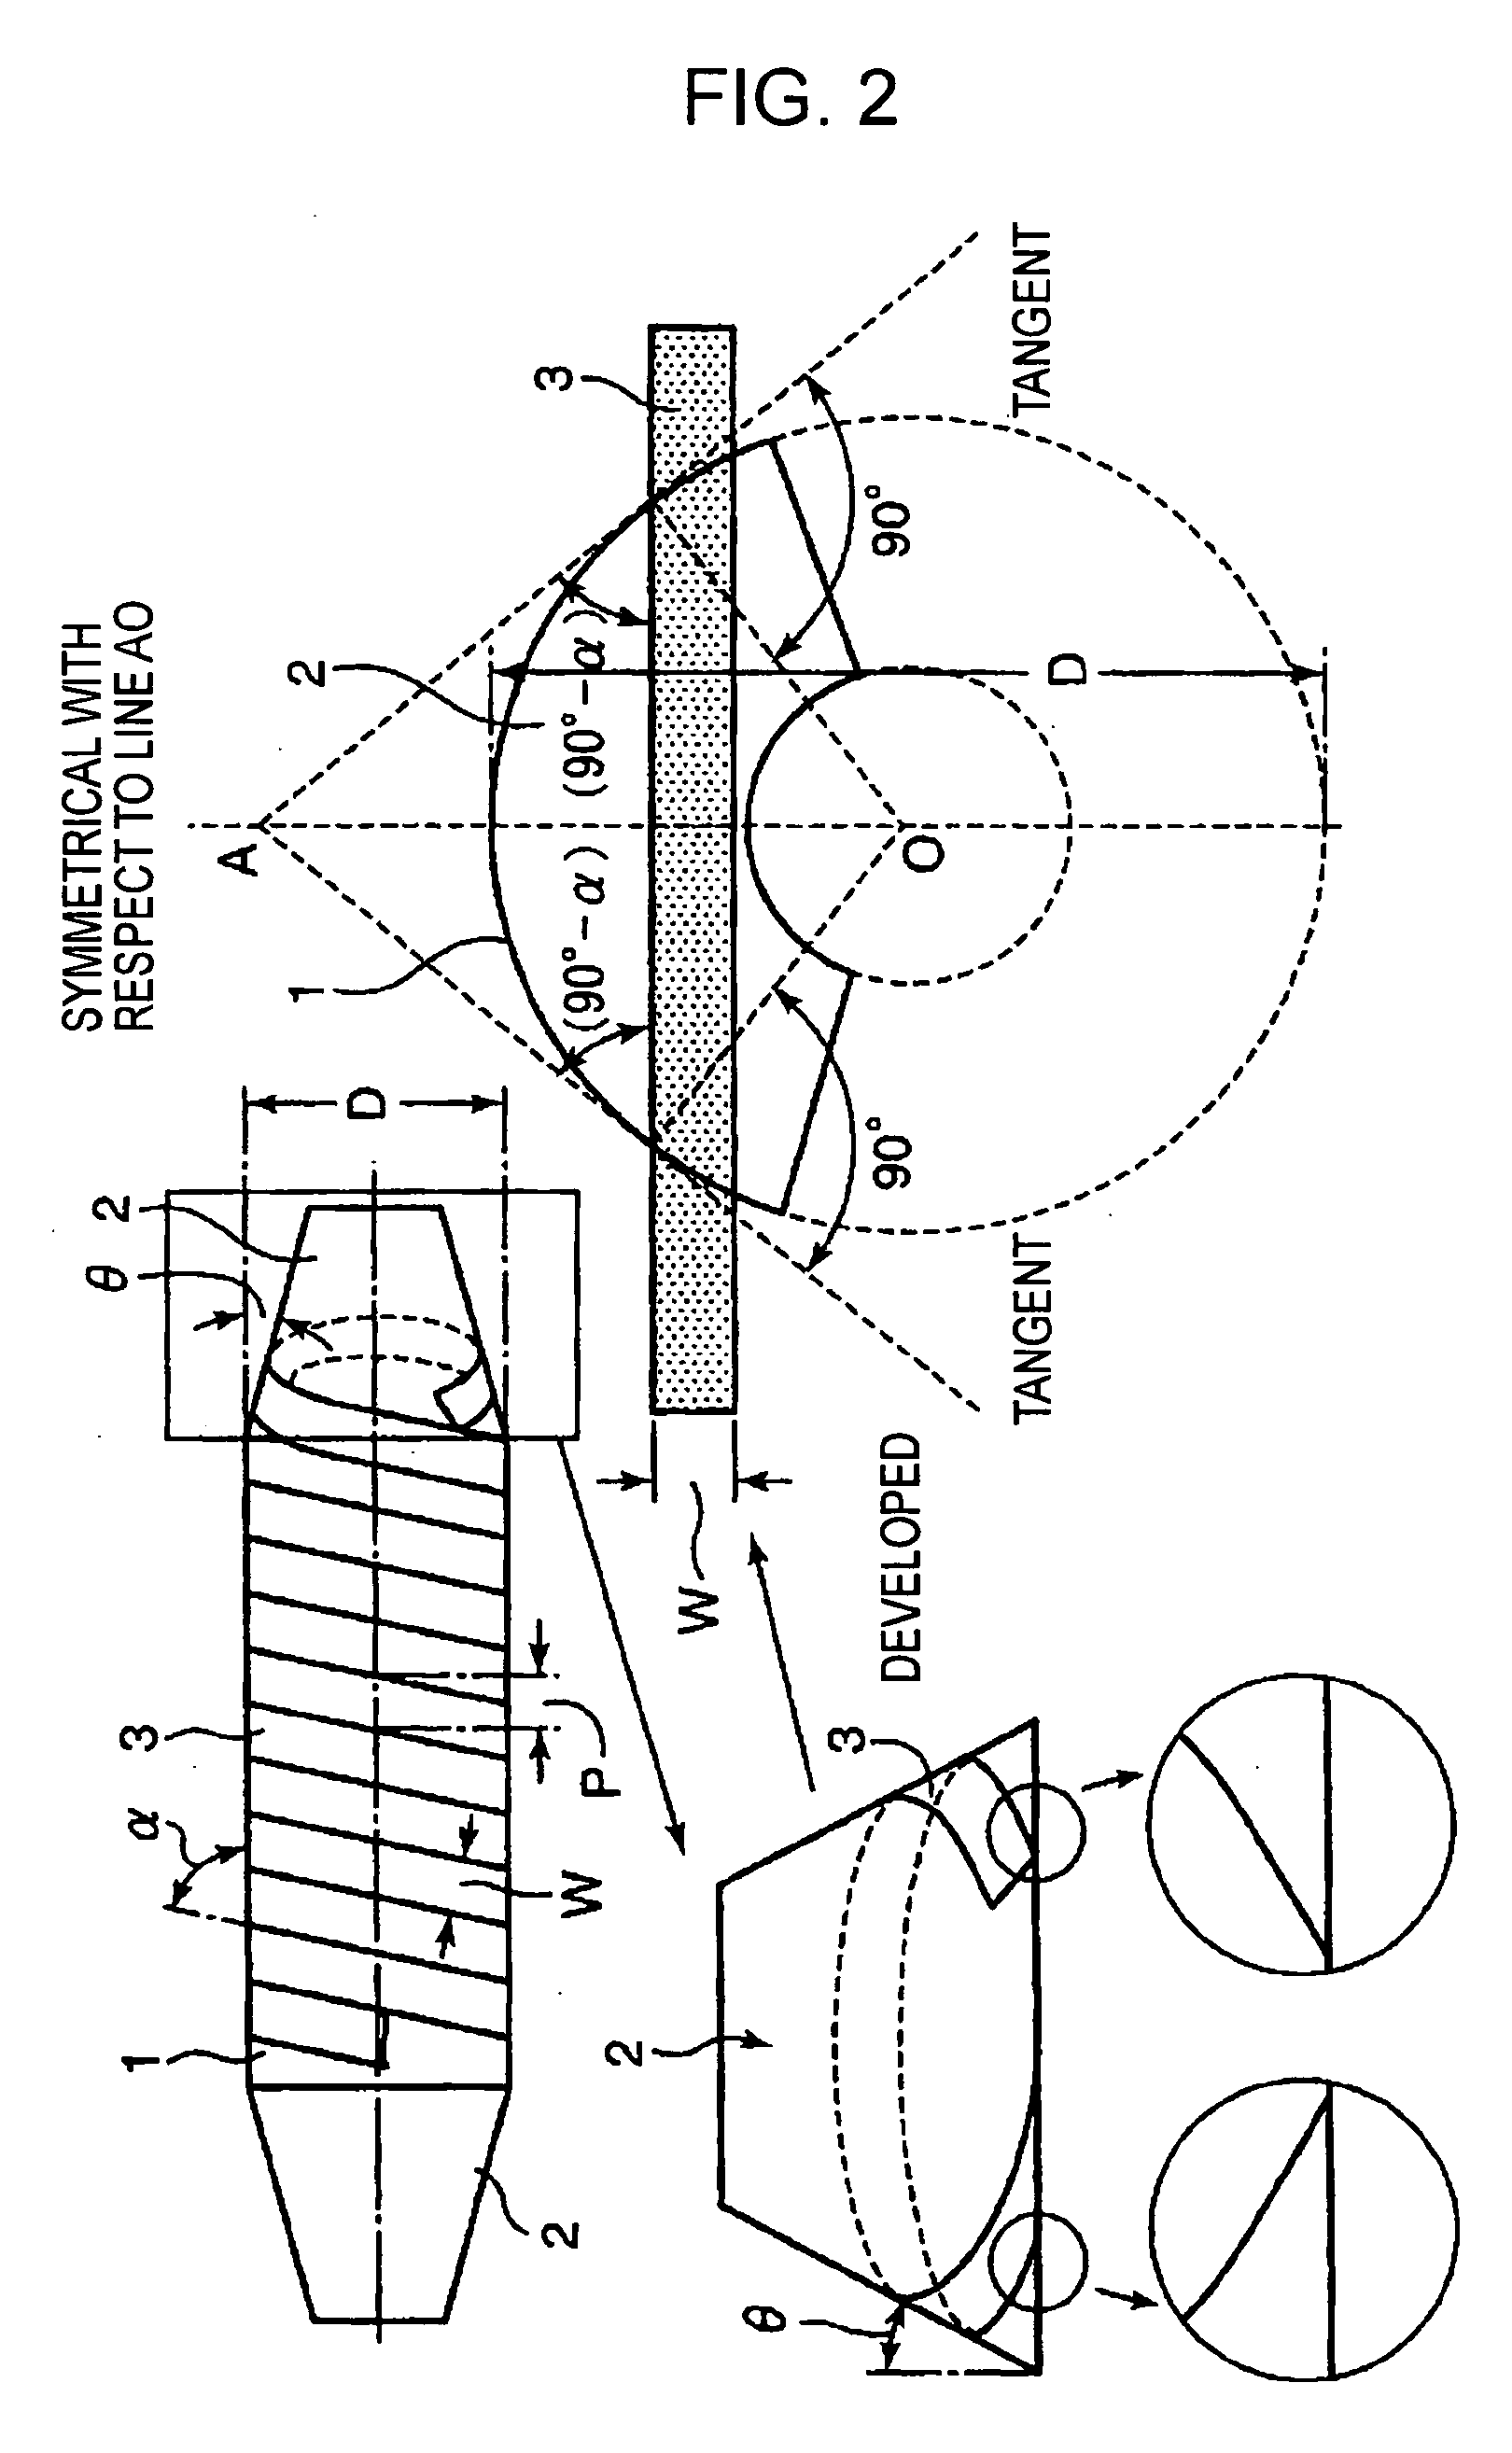 Bobbin for superconducting coil, and superconducting solenoid coil